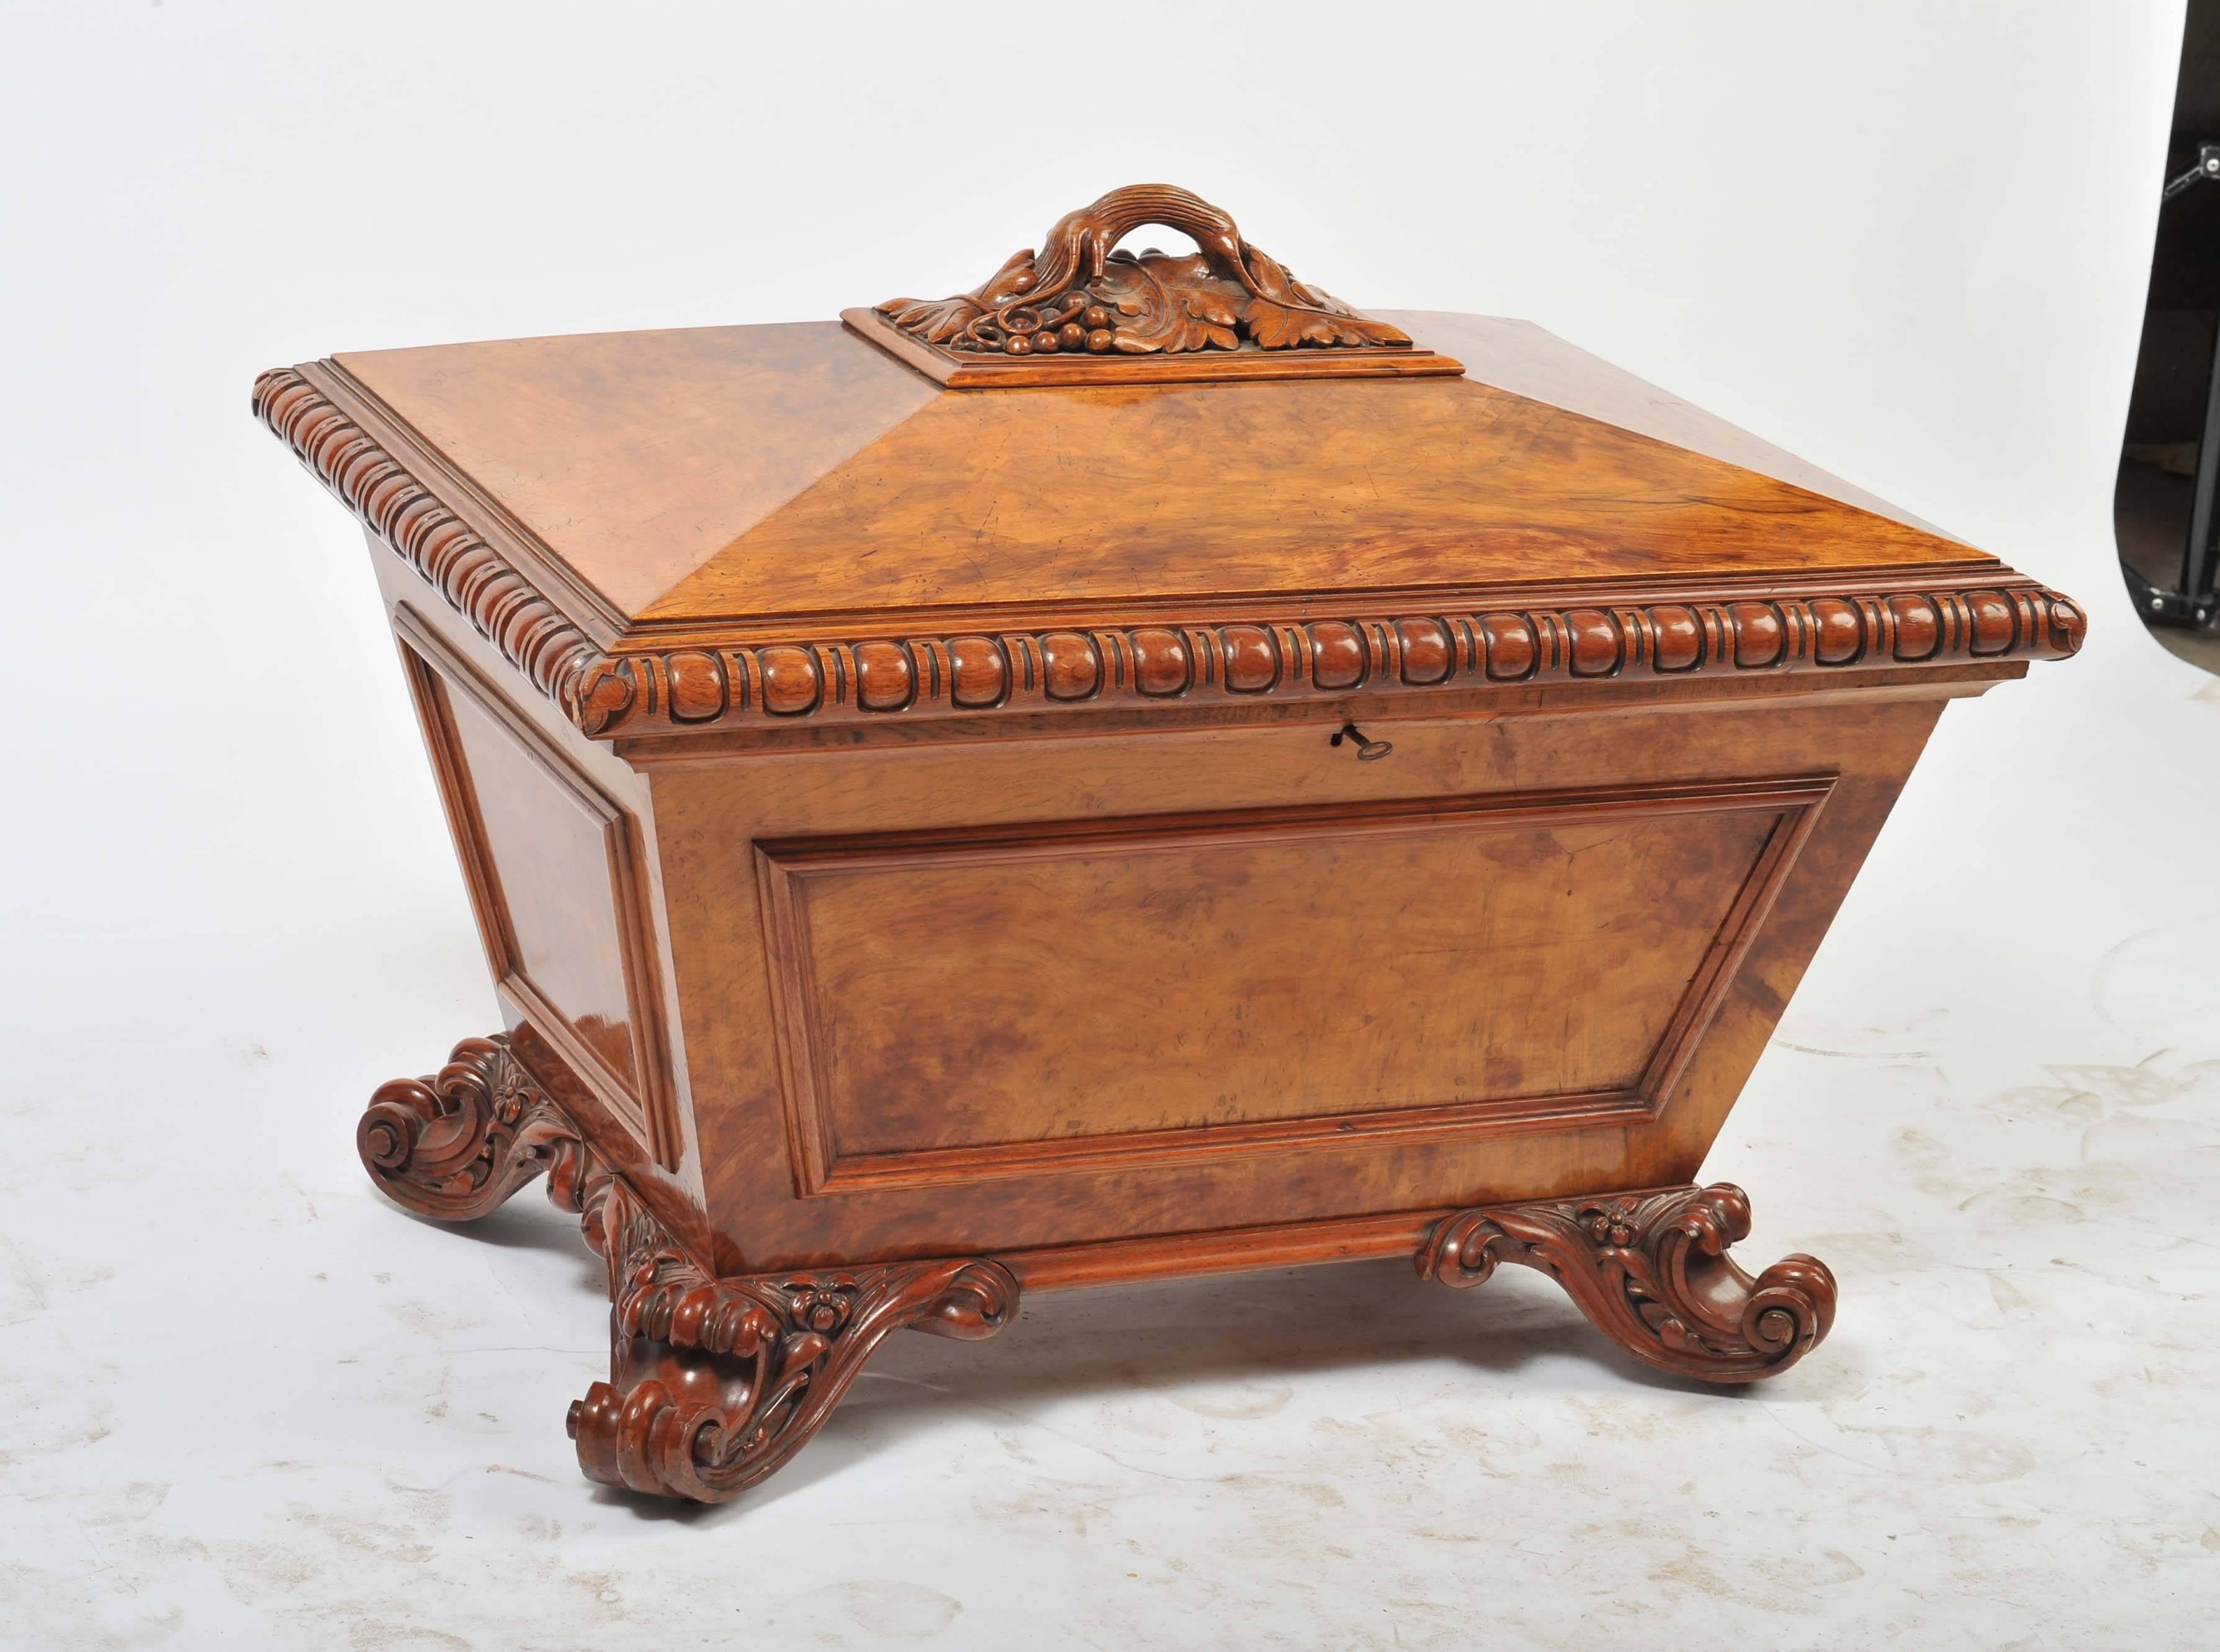 A very good quality late Regency period figured oak celleret, having a carved vine leaves and grapes to the handle, hinged top with lead liner. Carved gadrooned moulding, panels to the sides and raised on classical scrolling feet and brass castors.